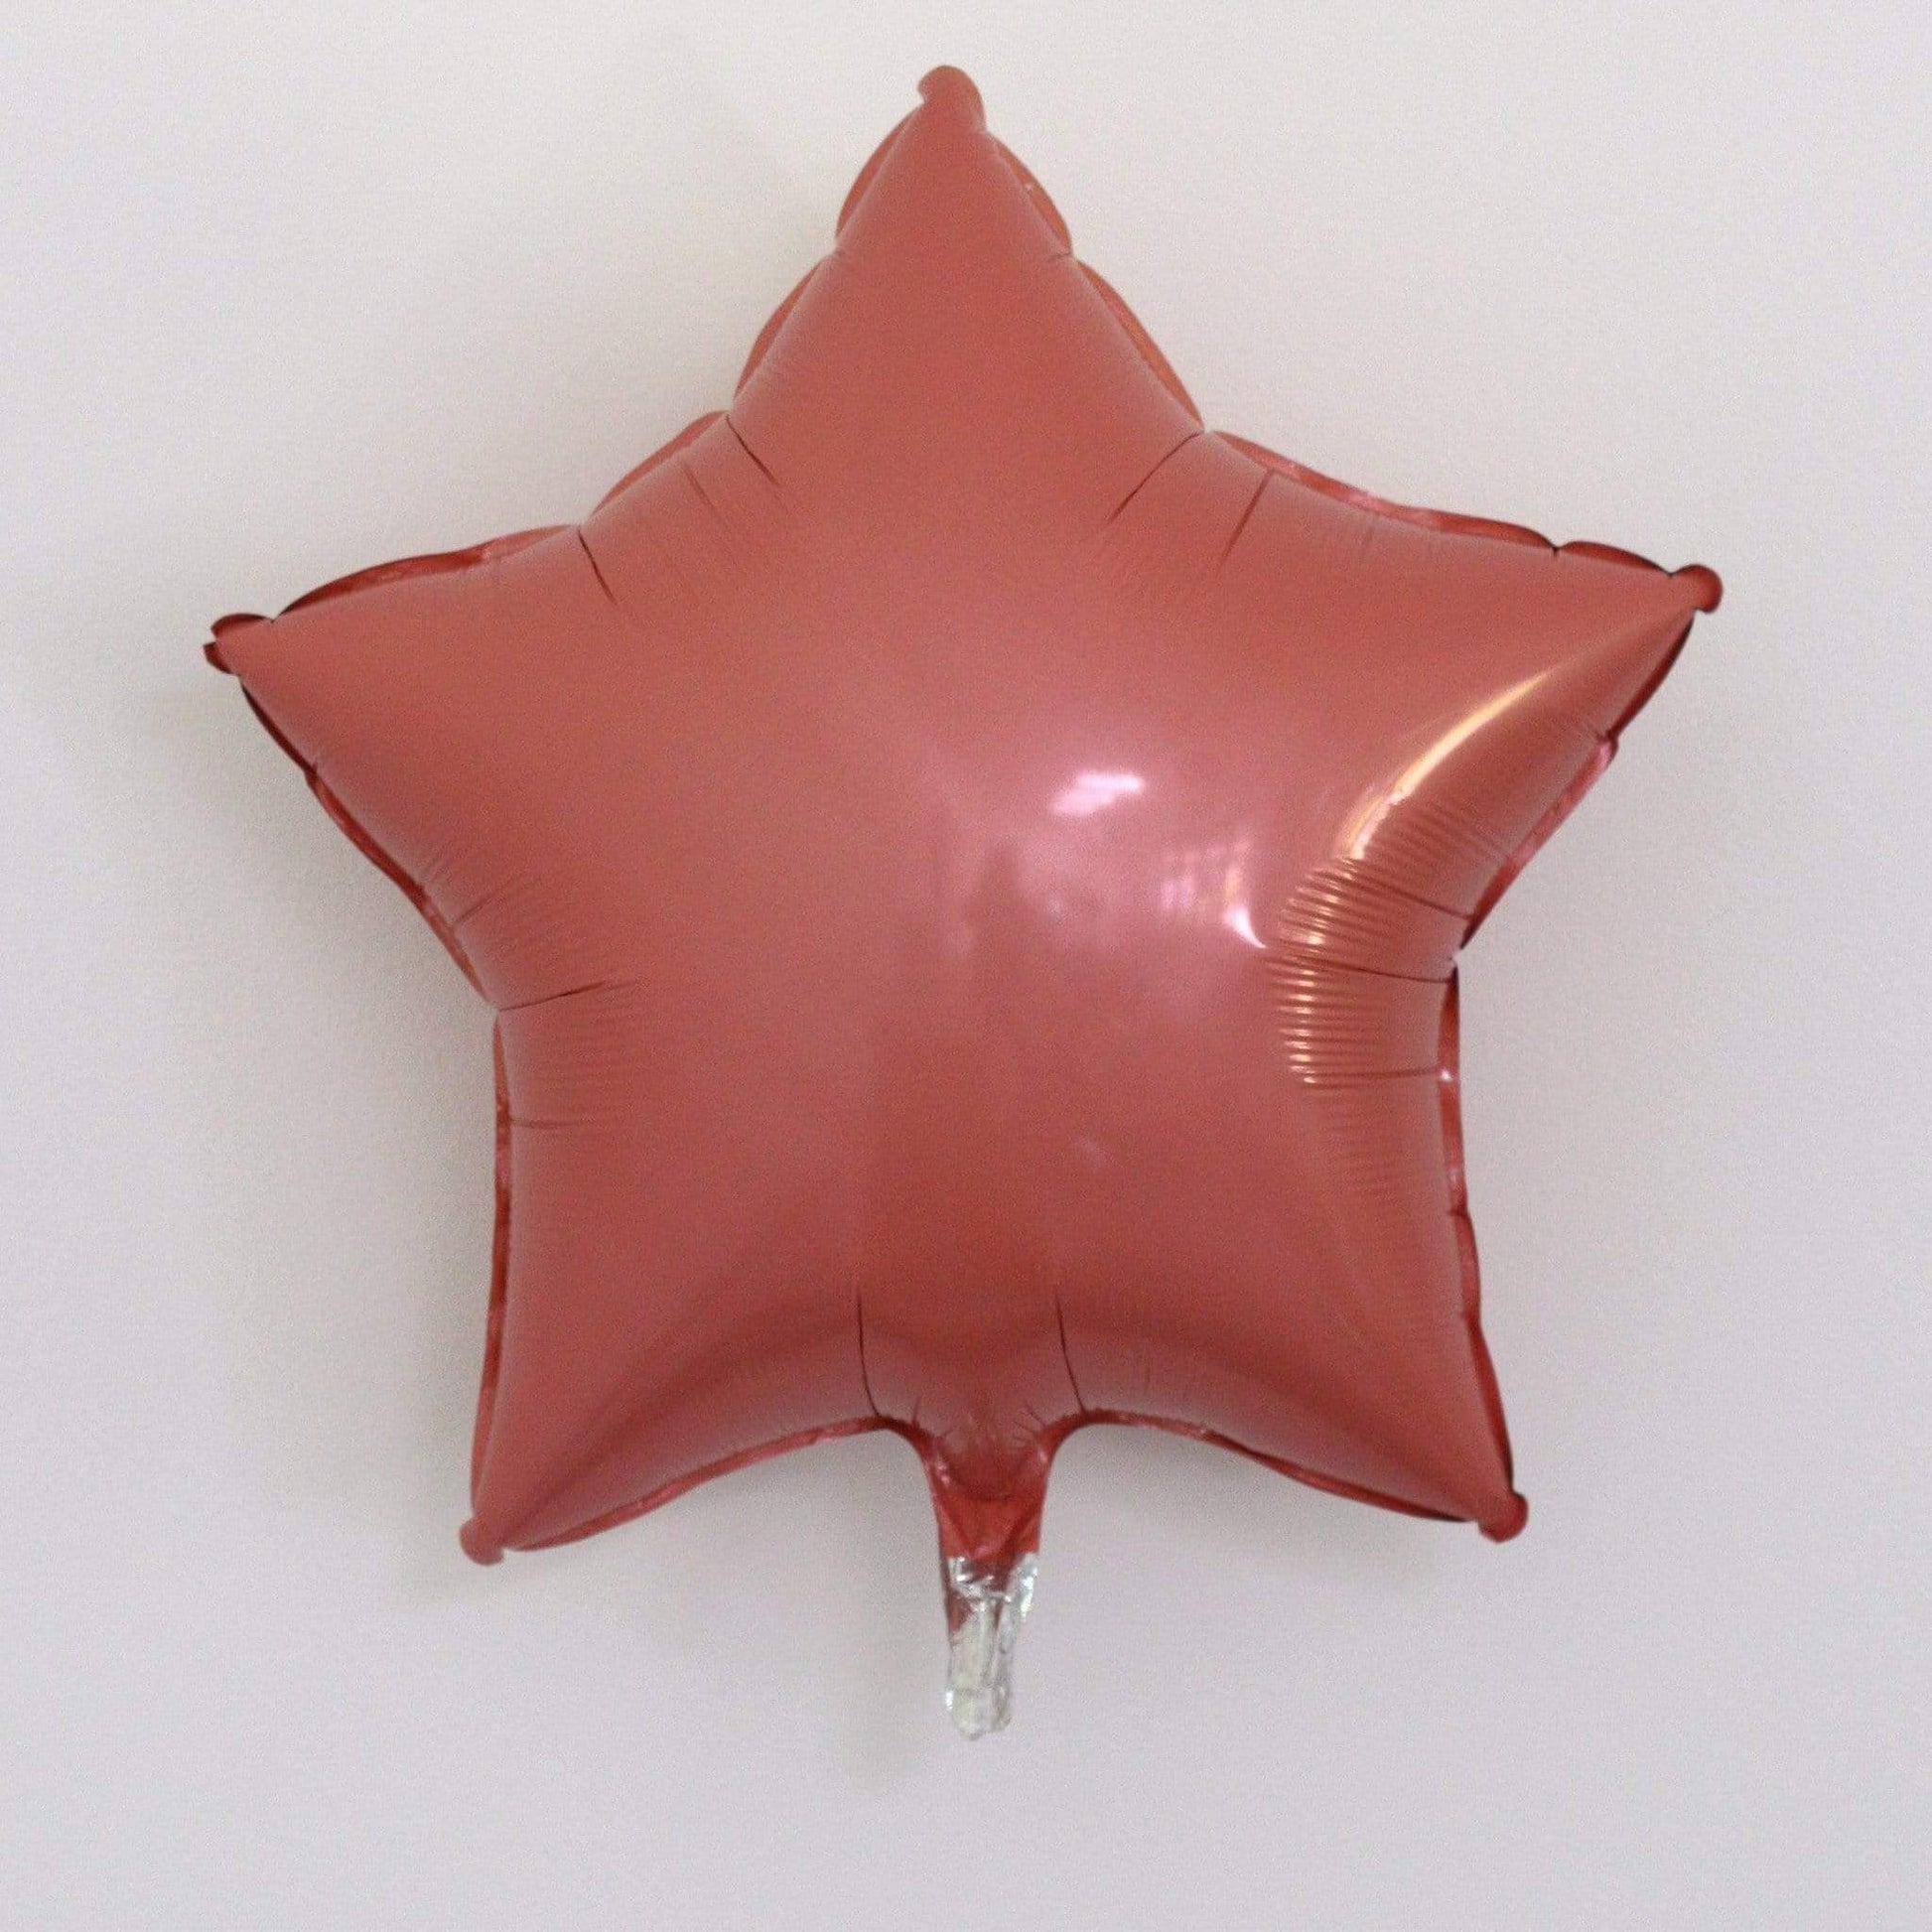 Coral Star Foil Balloons | Helium Balloons | Online Balloonery Qualatex